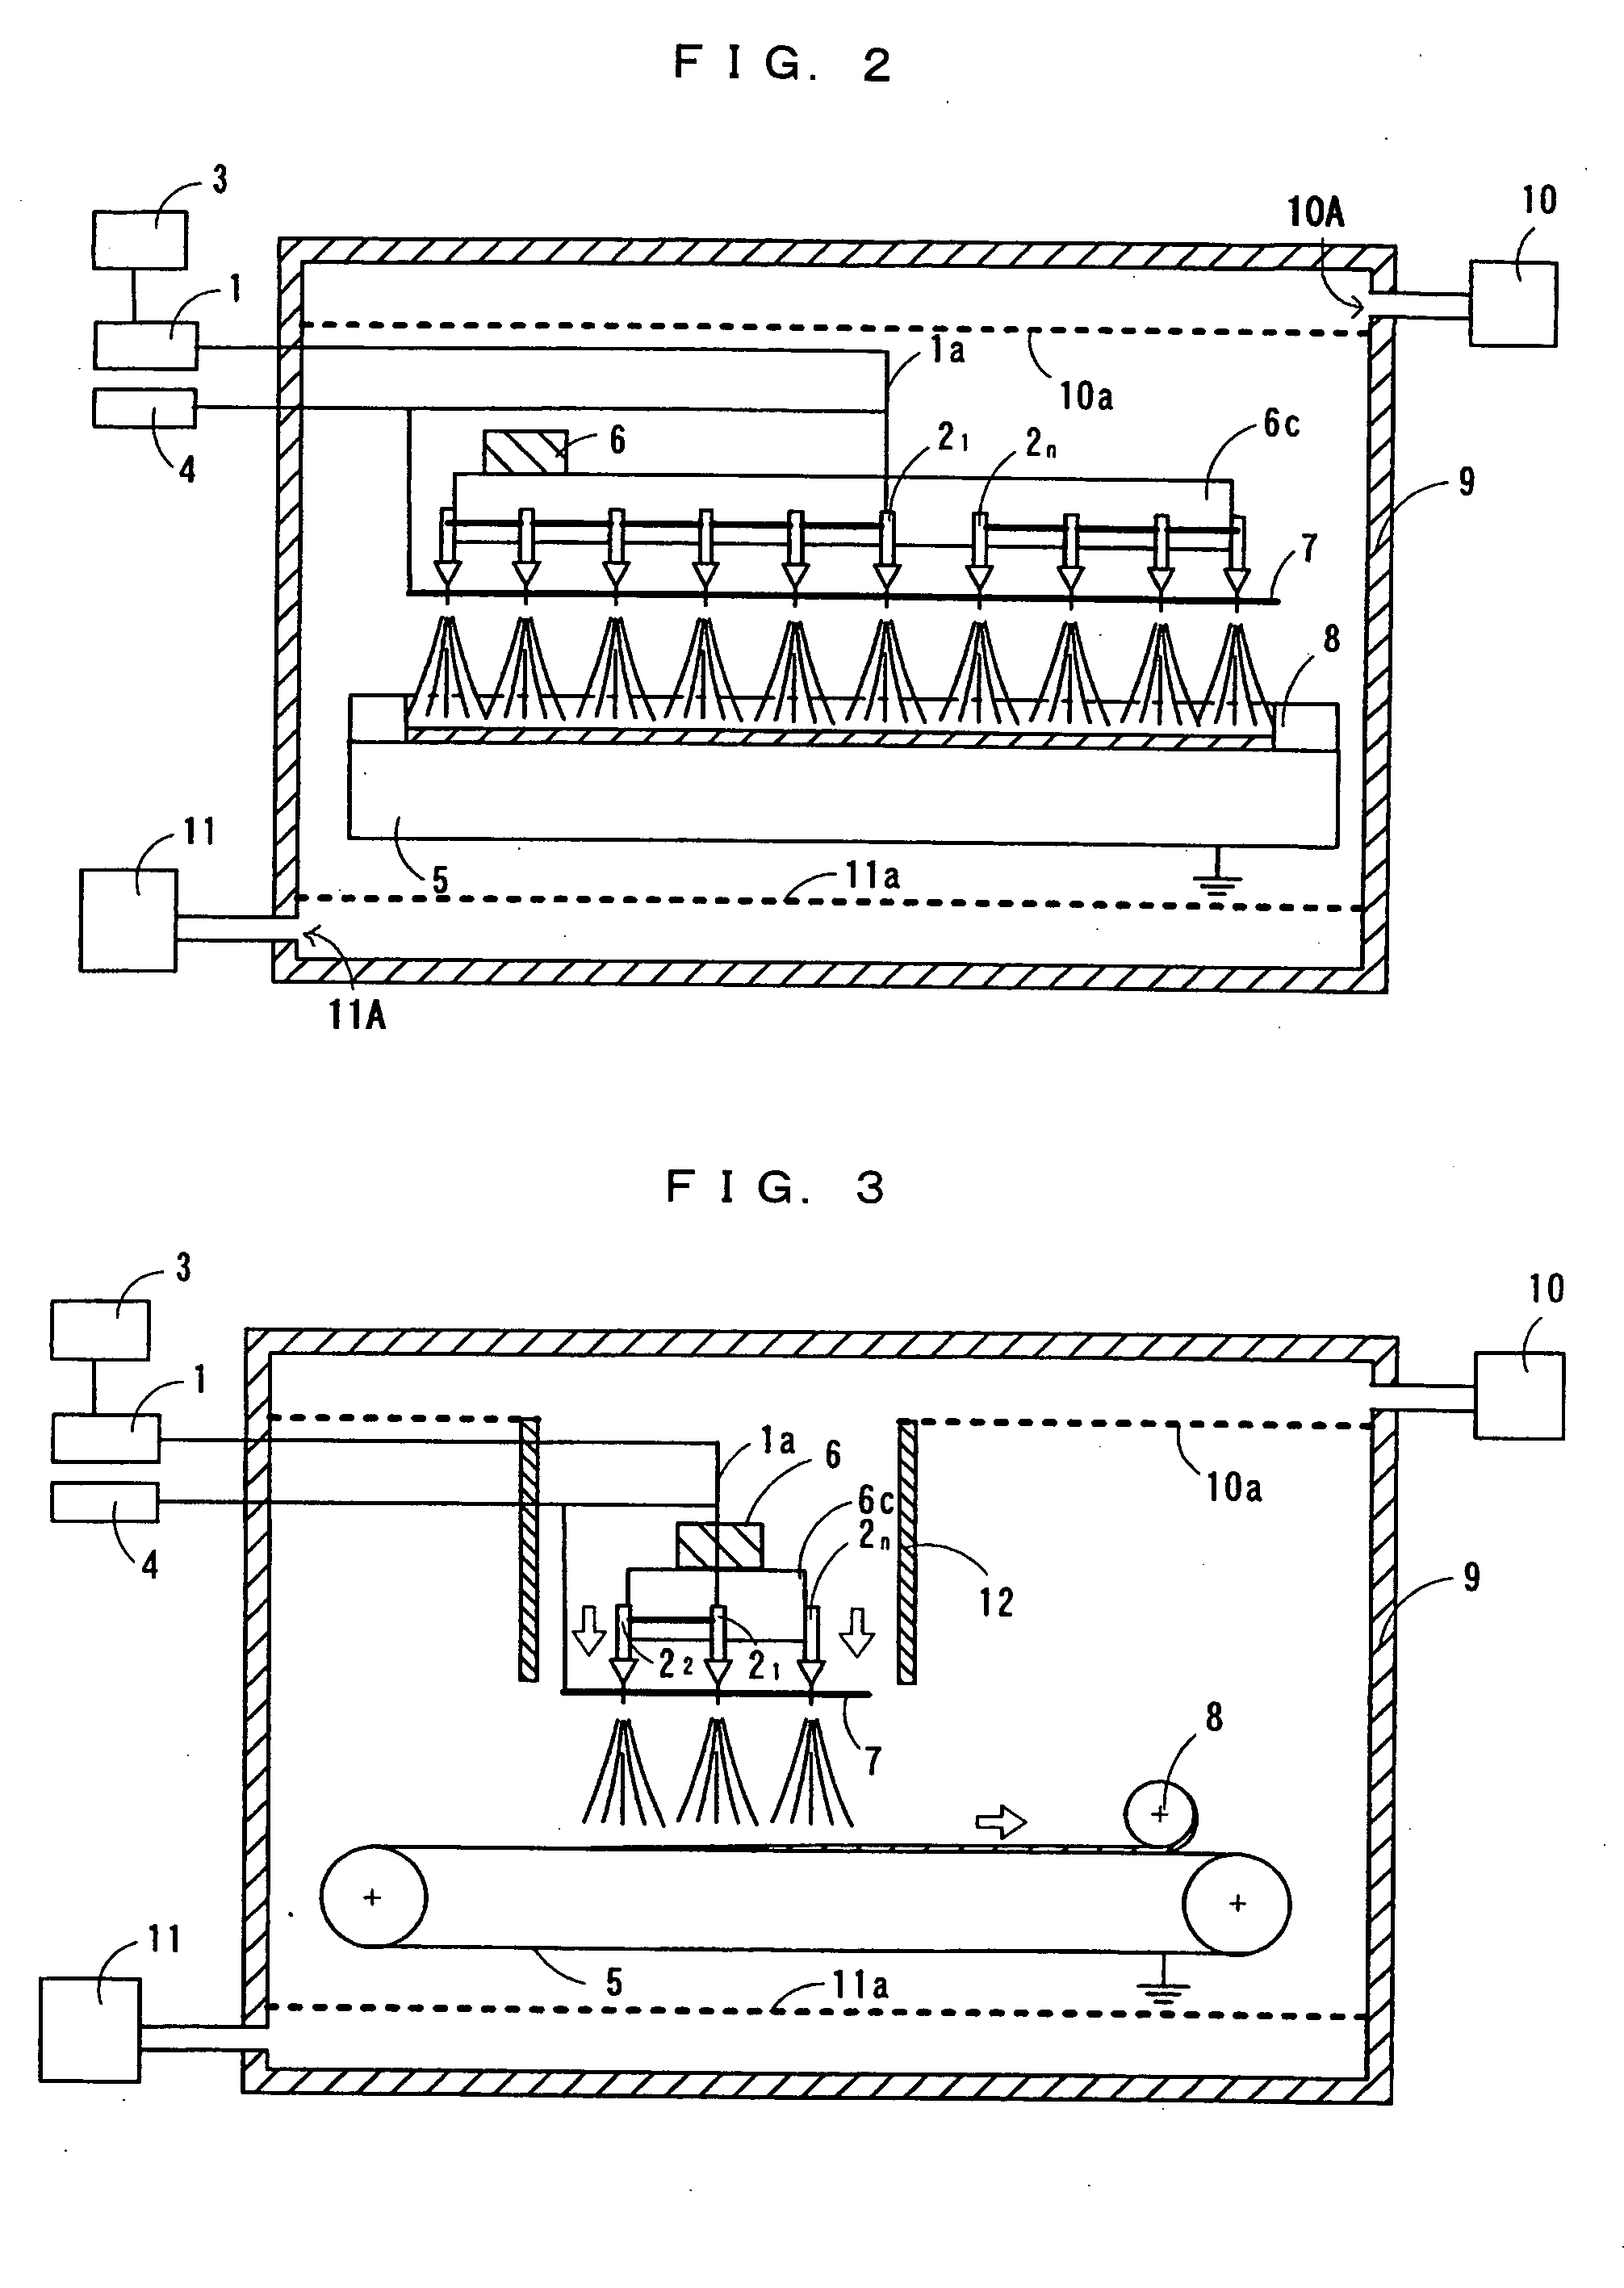 Method and apparatus of producing fibrous aggregate